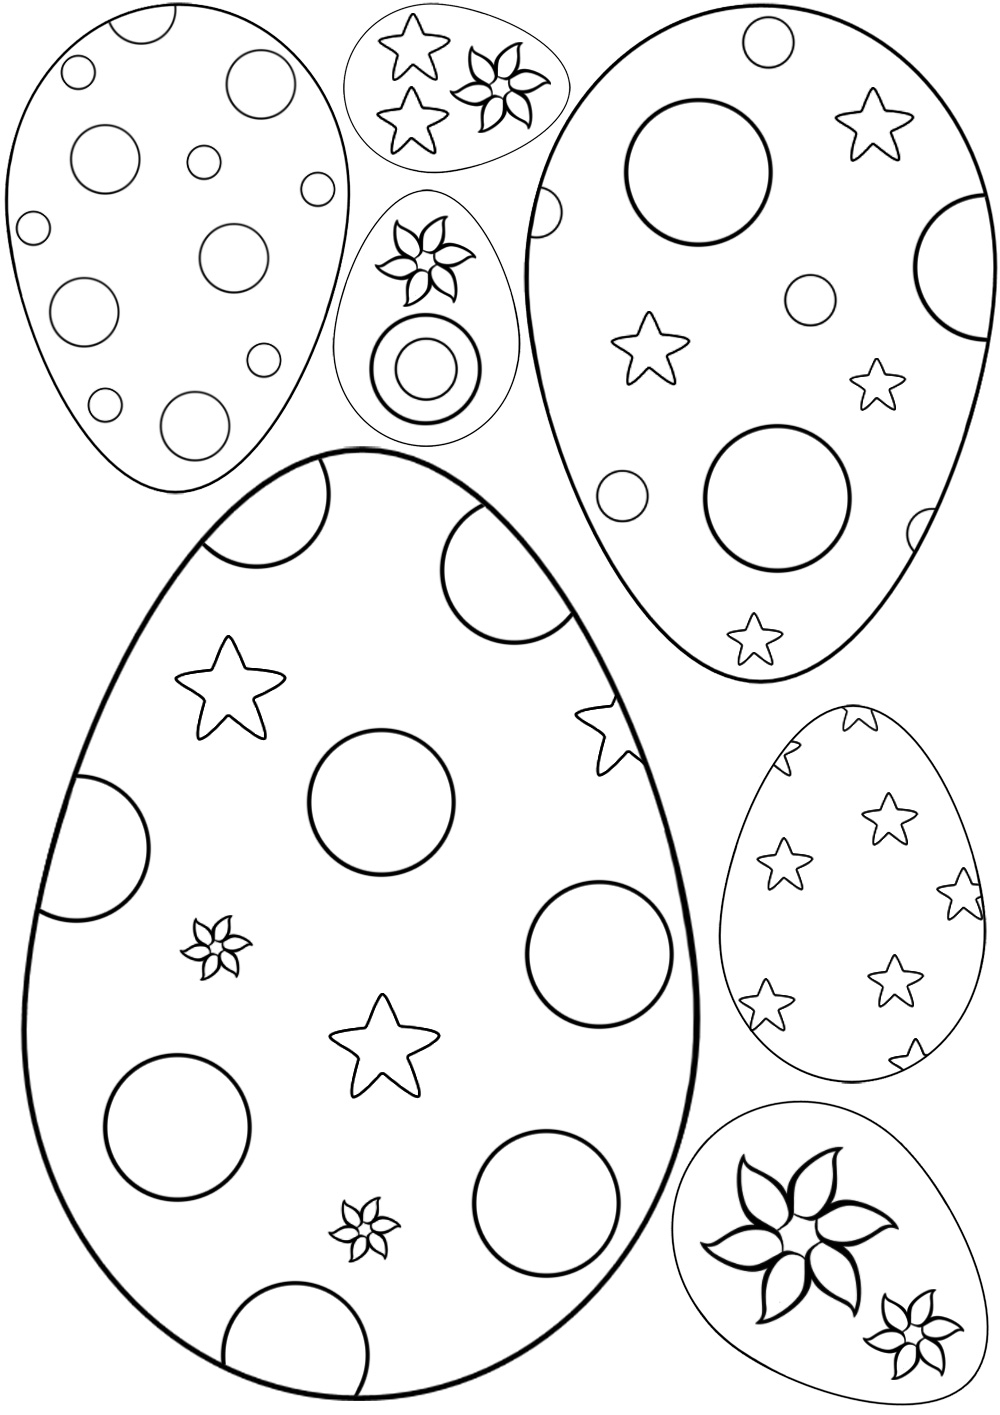 Useful templates for patterned Easter eggs - great for kids to colour in.